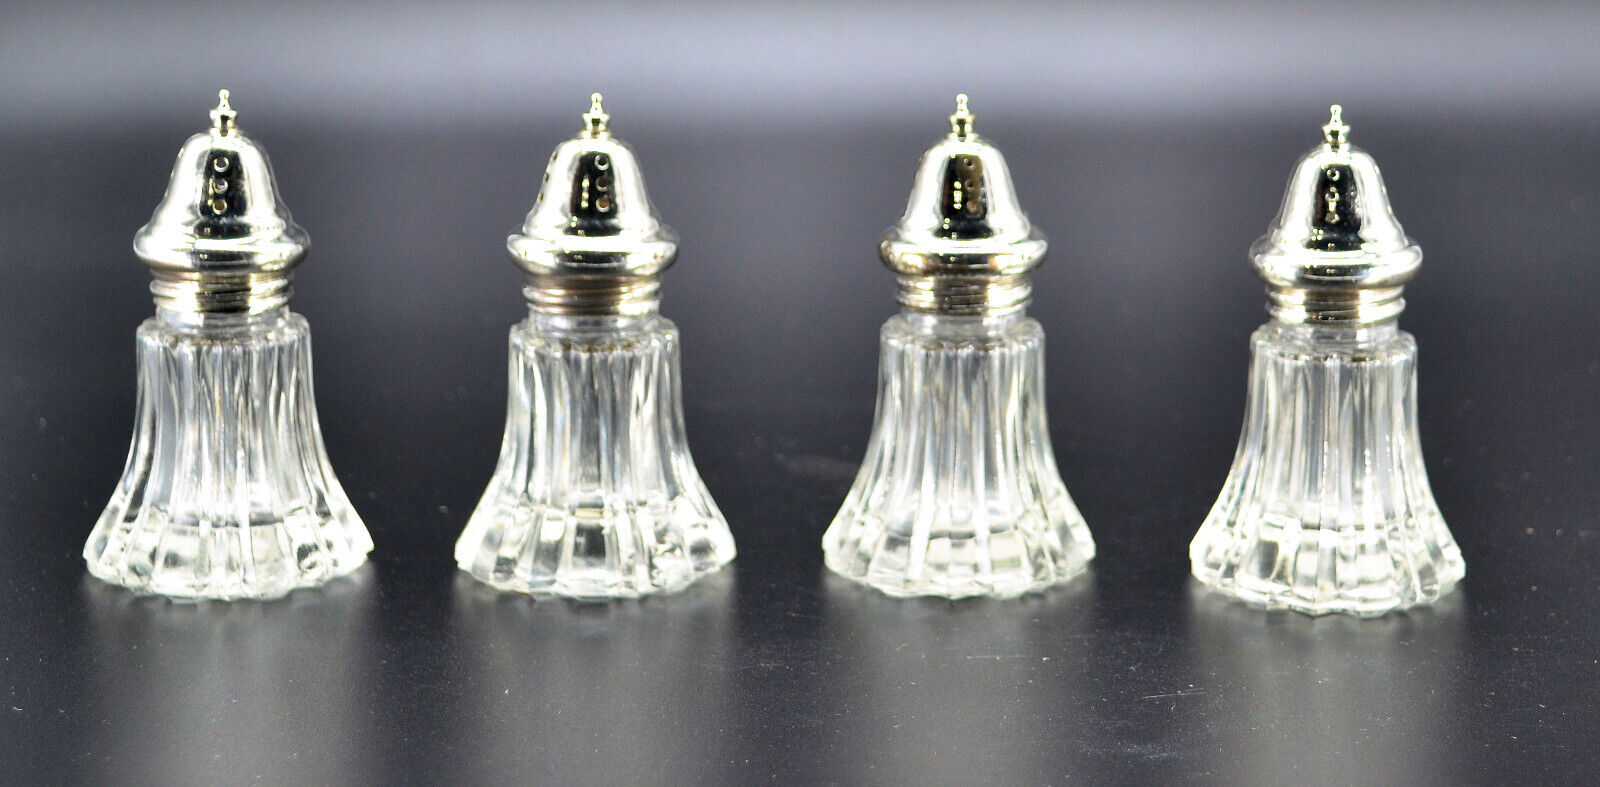 A Price Imports 4 Piece Salt & Pepper Shakers Fine Giftware Stock #7443 Japan W2